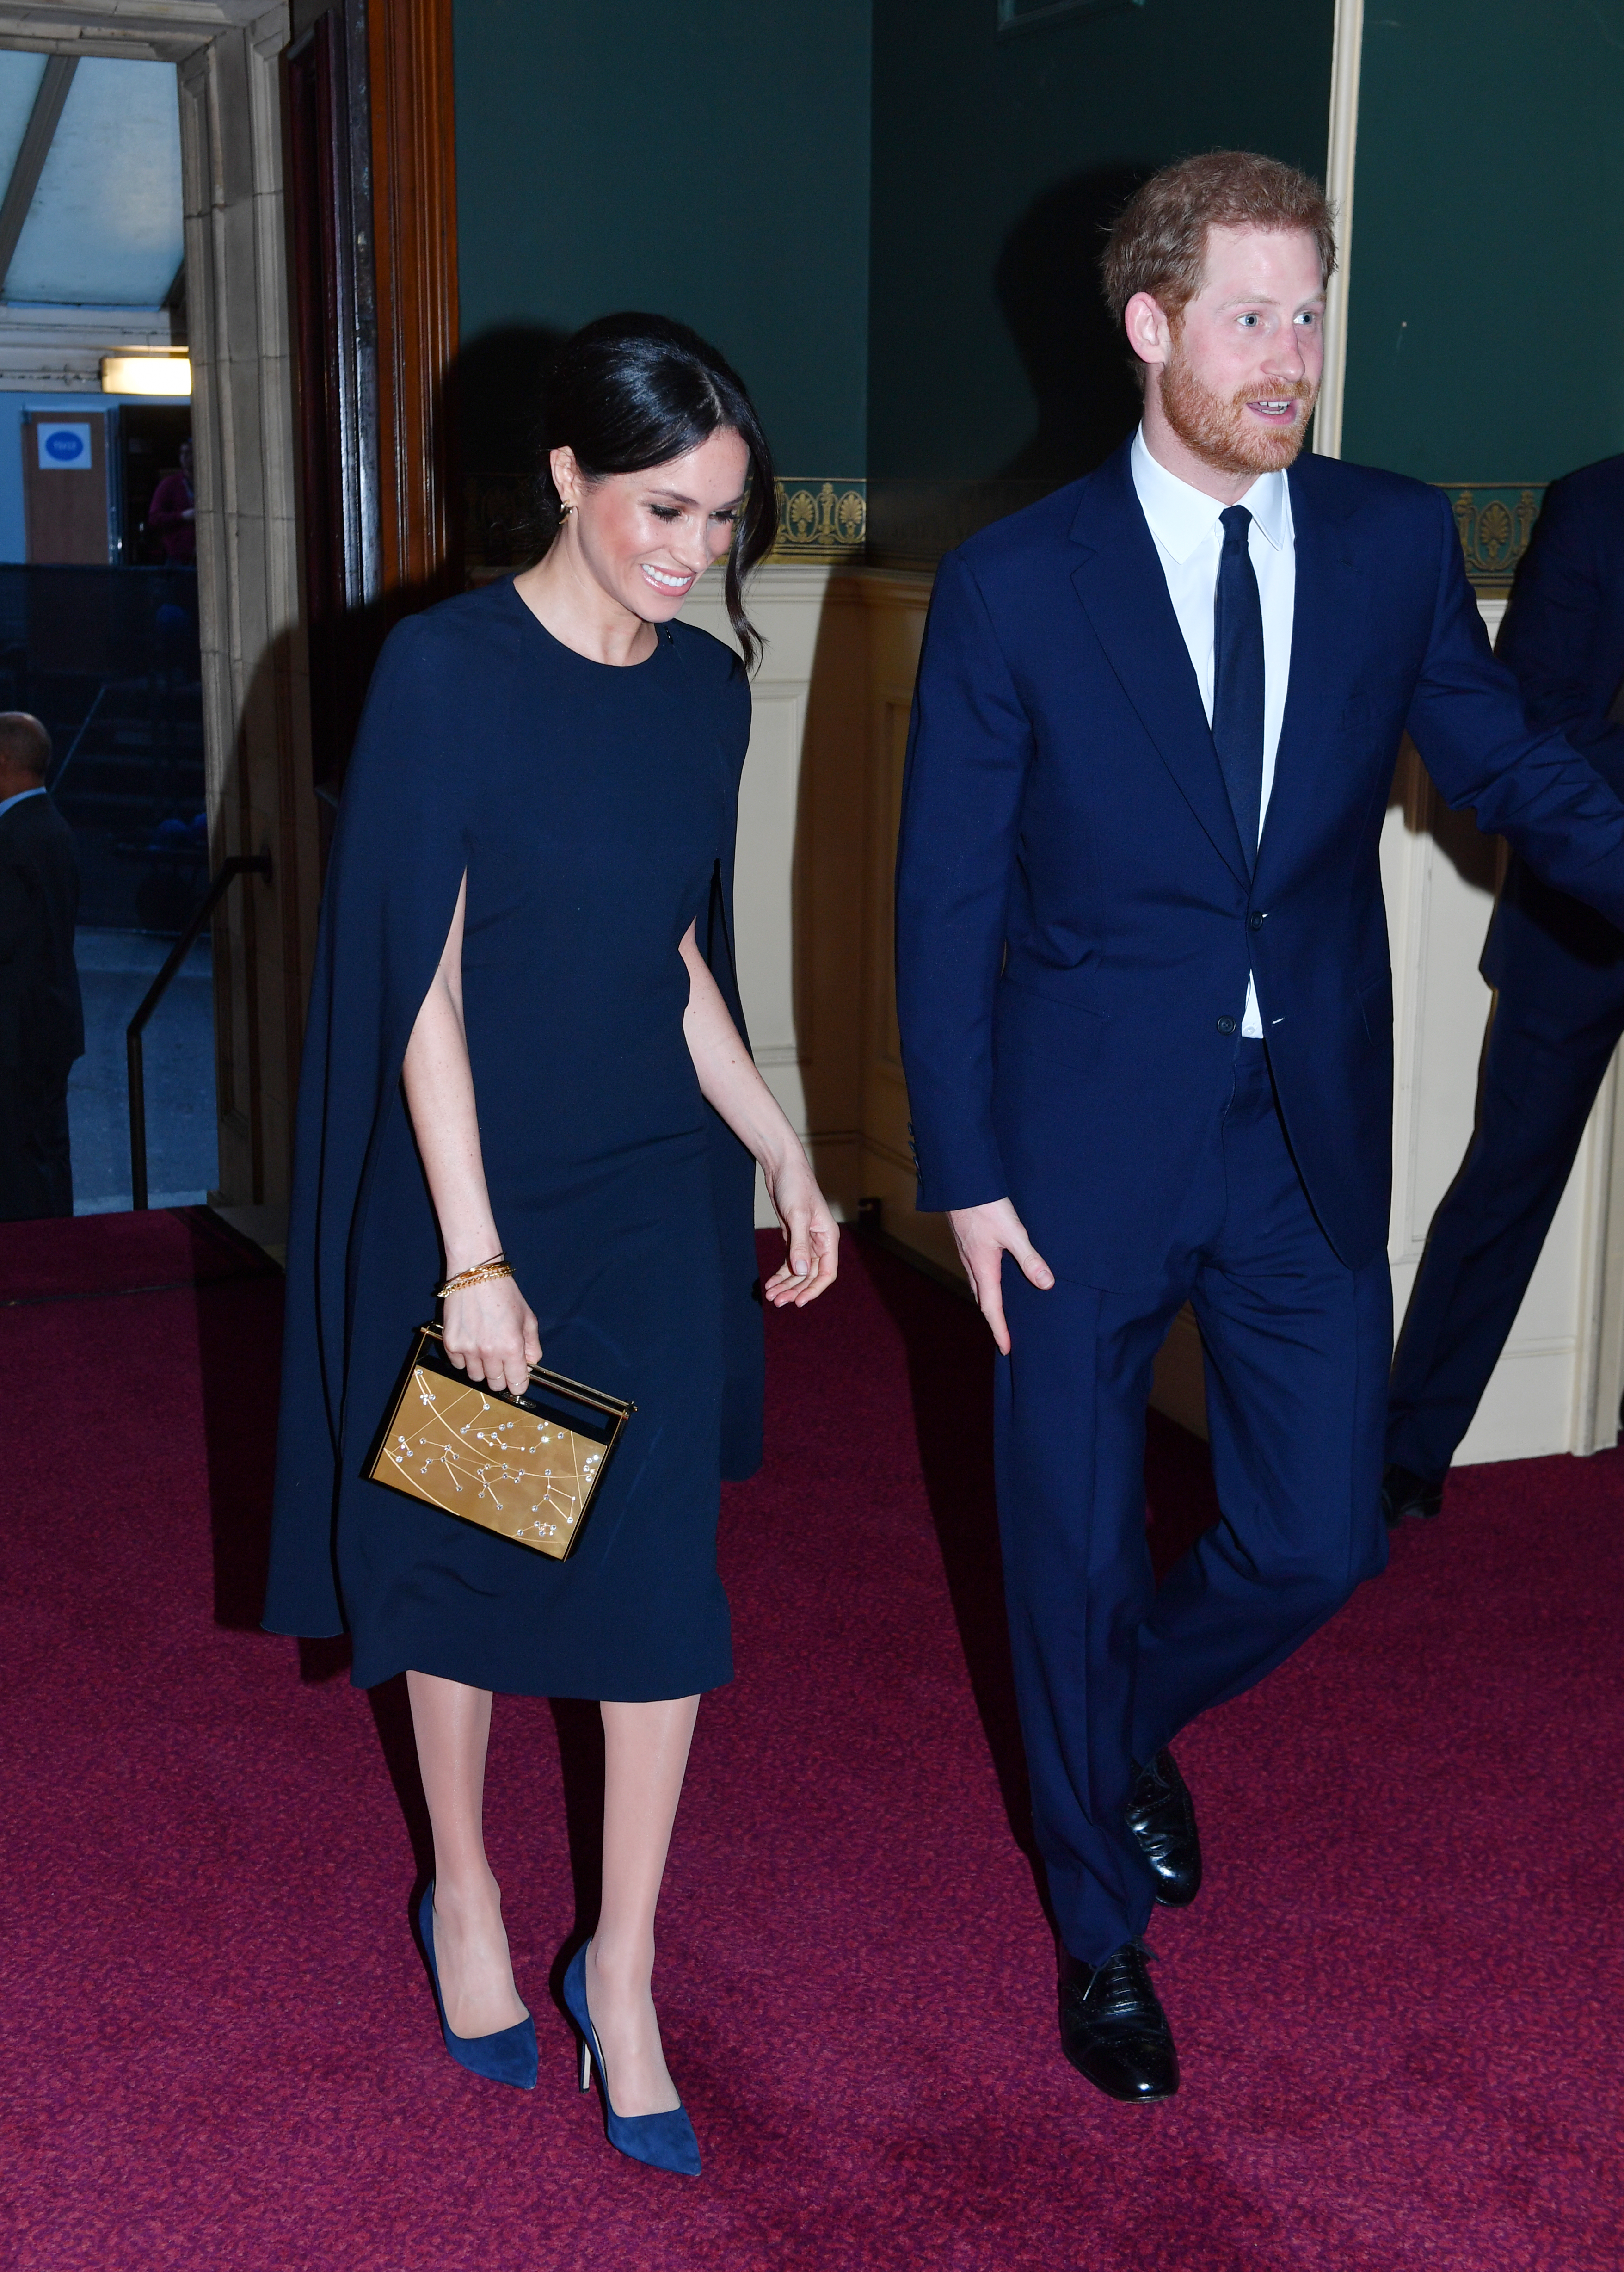 Prince Harry and Meghan Markle arrive at the Royal Albert Hall to attend a star-studded concert to celebrate the Queen's 92nd birthday on April 21, 2018 in London, England.  The Queen and members of the royal family are guests of honour at the celebration, which is being billed as The Queen's Birthday Party. (John Stillwell—WPA Pool/Getty Images)